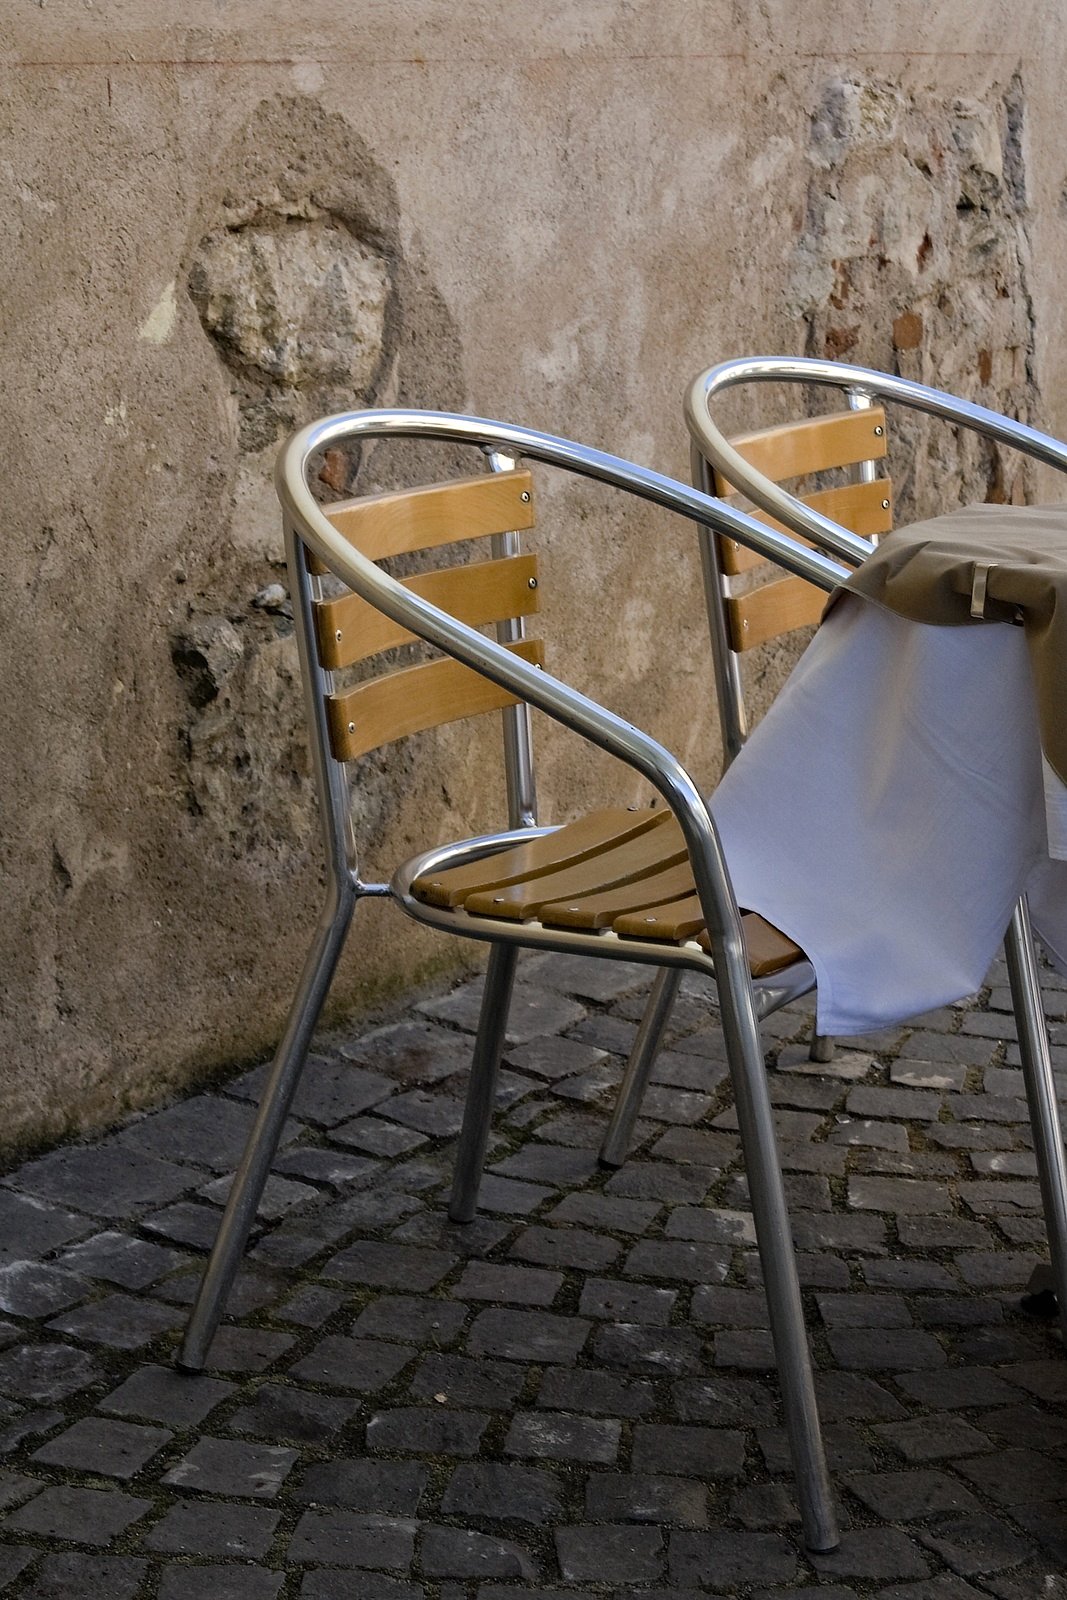 two chairs sitting next to a table with an umbrella on it